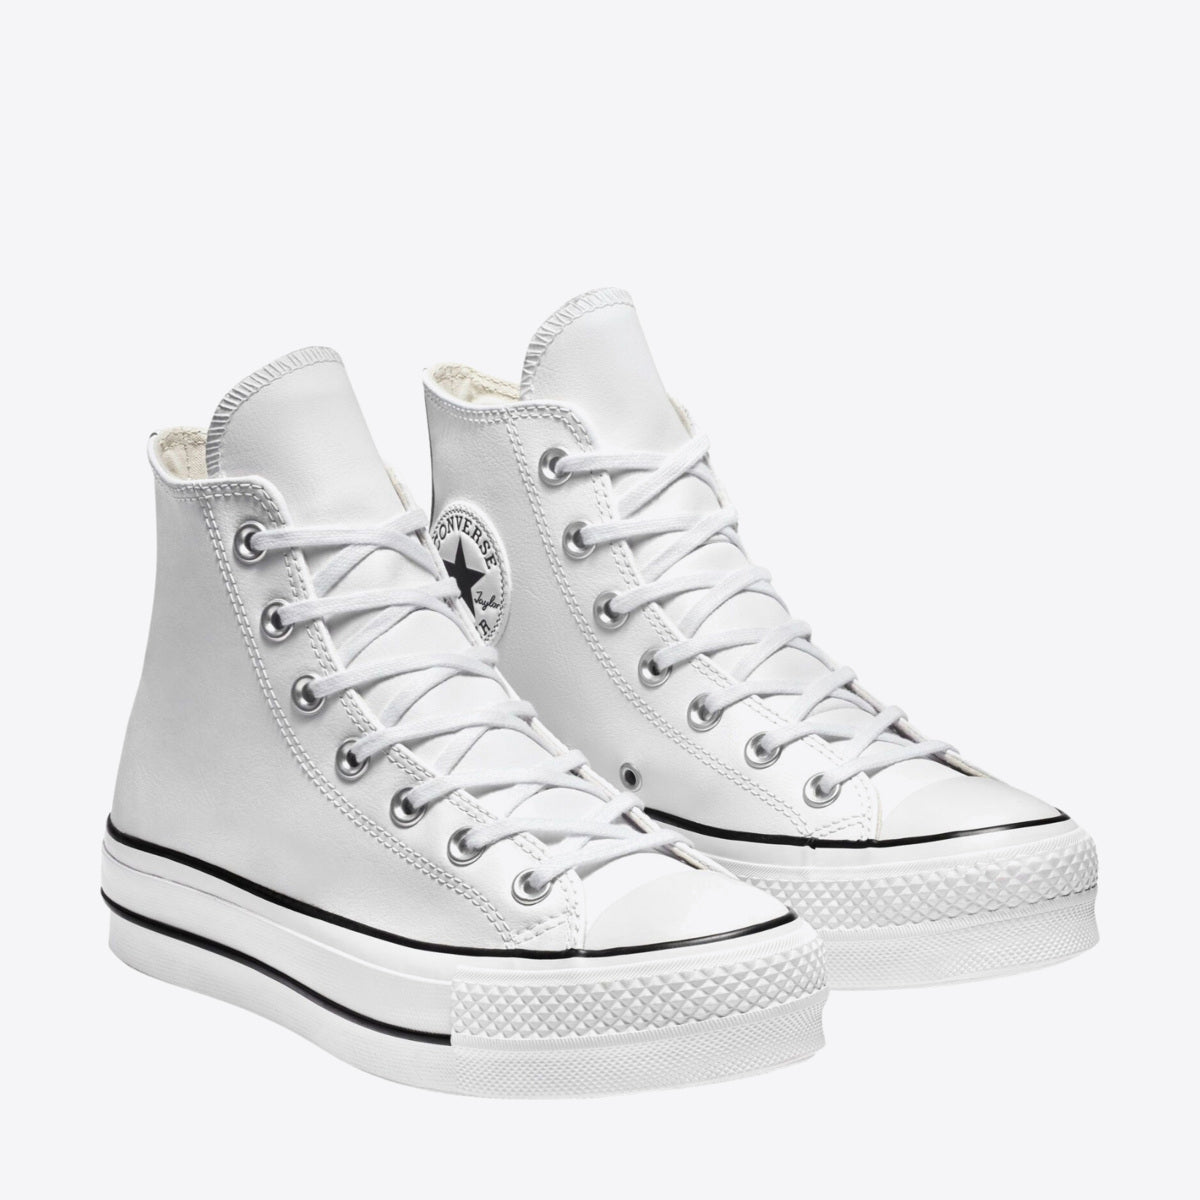 CONVERSE Chuck Taylor All Star Lift High White Leather - Image 5